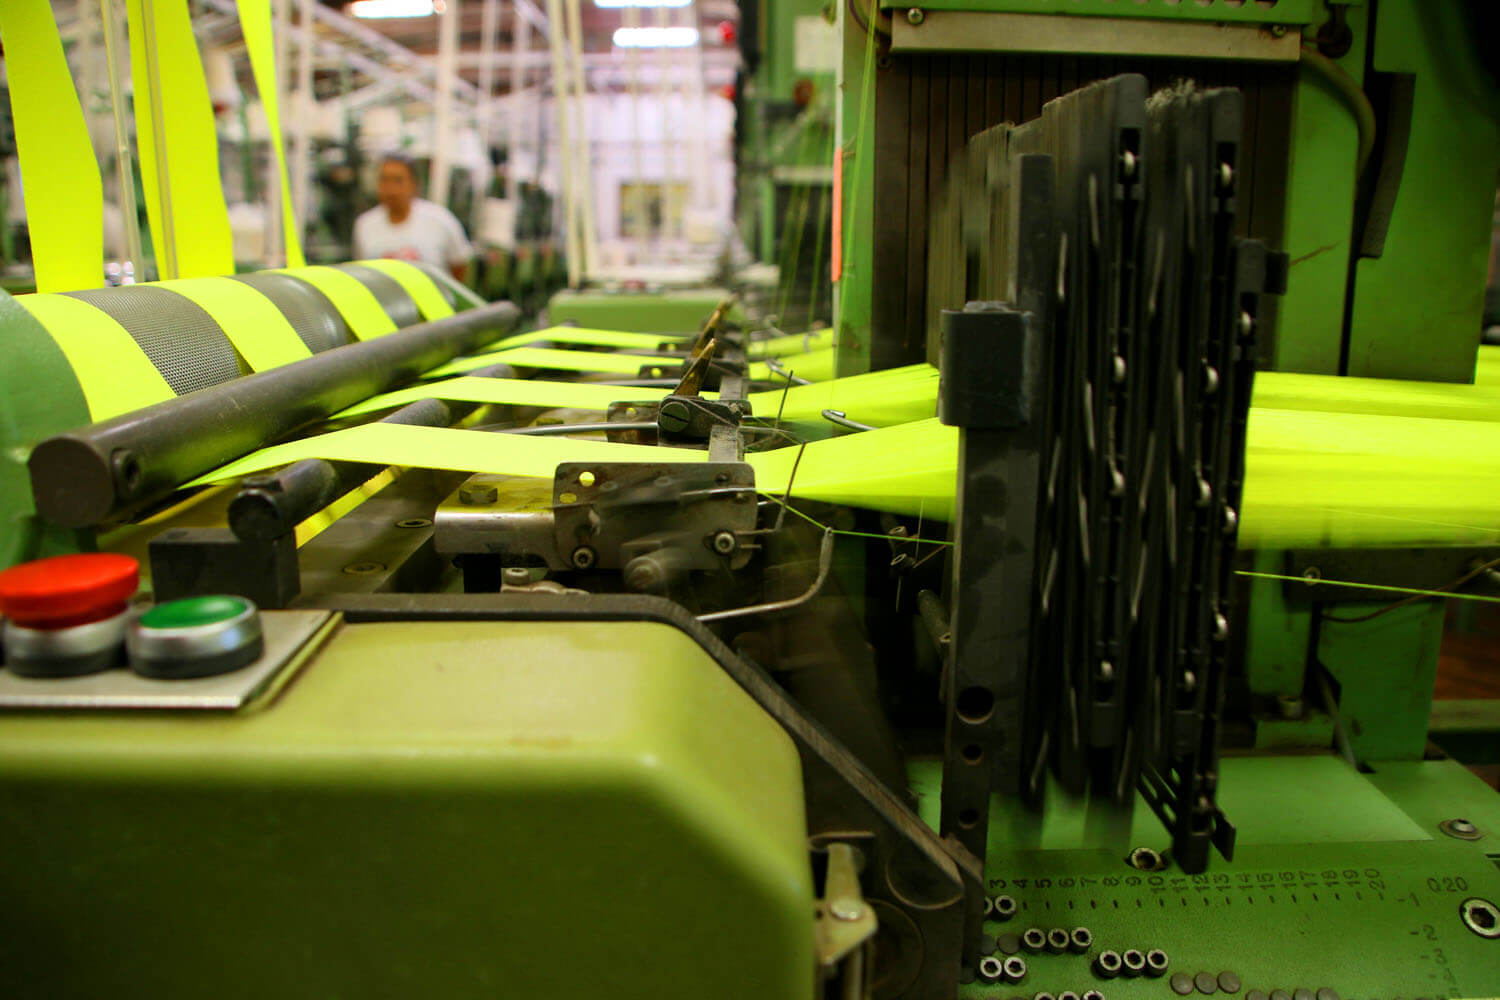 A machine in a textile mill manufacturing large pieces of yellow fabric with an employee in the background